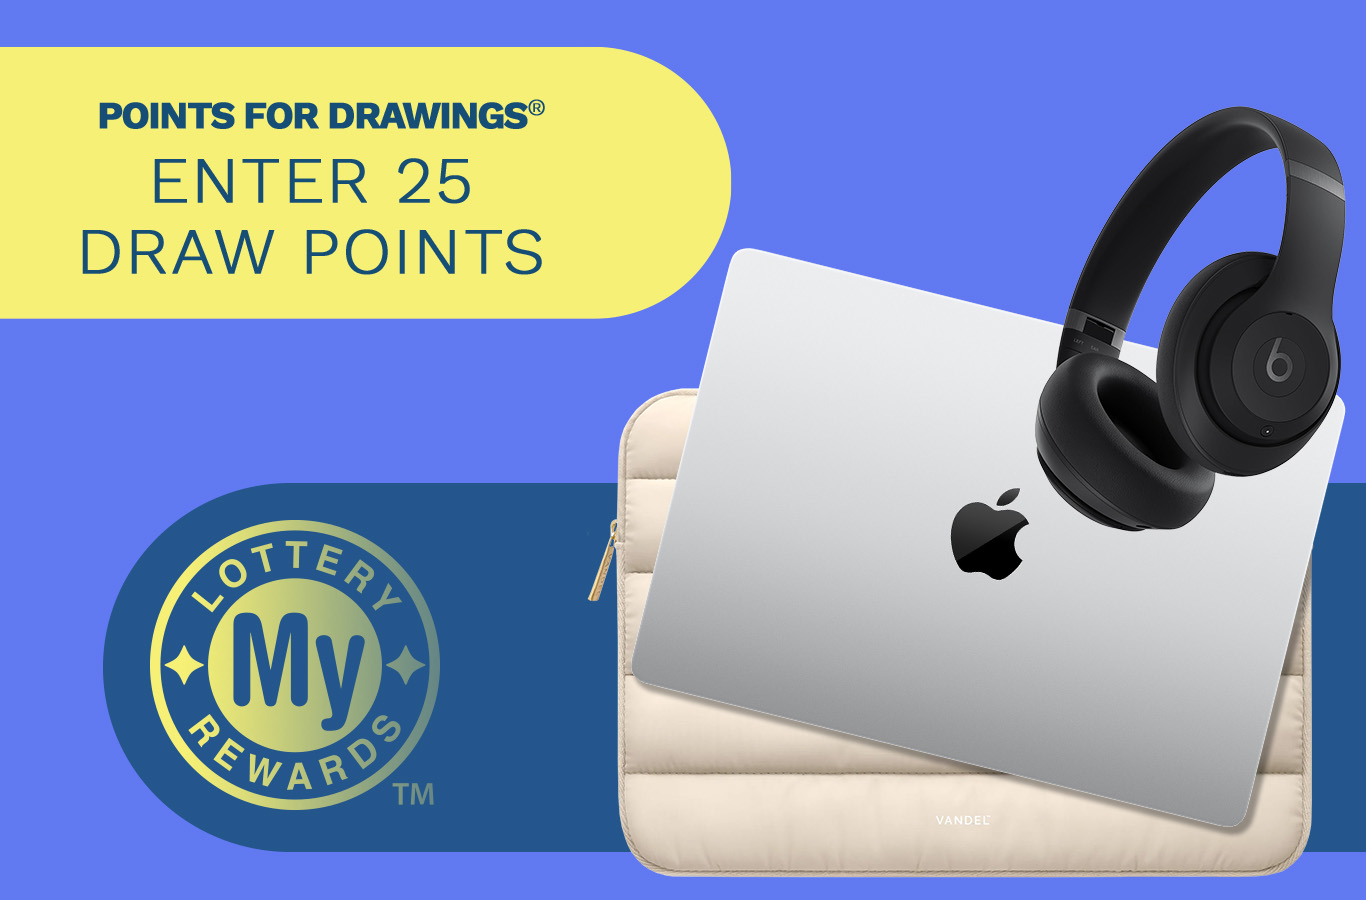 Here's your chance to win a MacBook® and Beats® Headphones! Enter by Monday, May 20th.